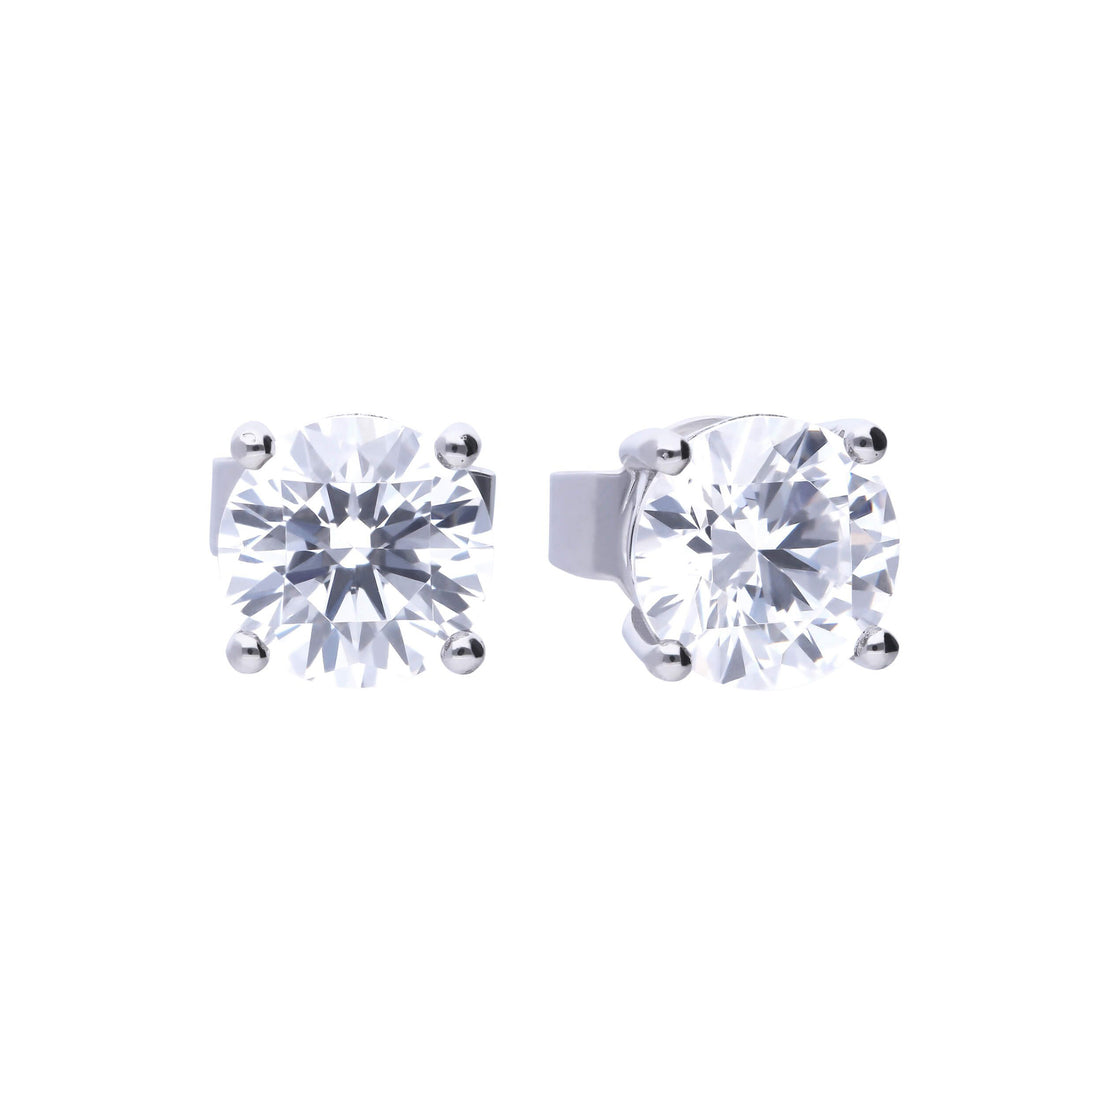 Silver and Zirconia Four Claw 1 Carat Stud Earrings — 1CT